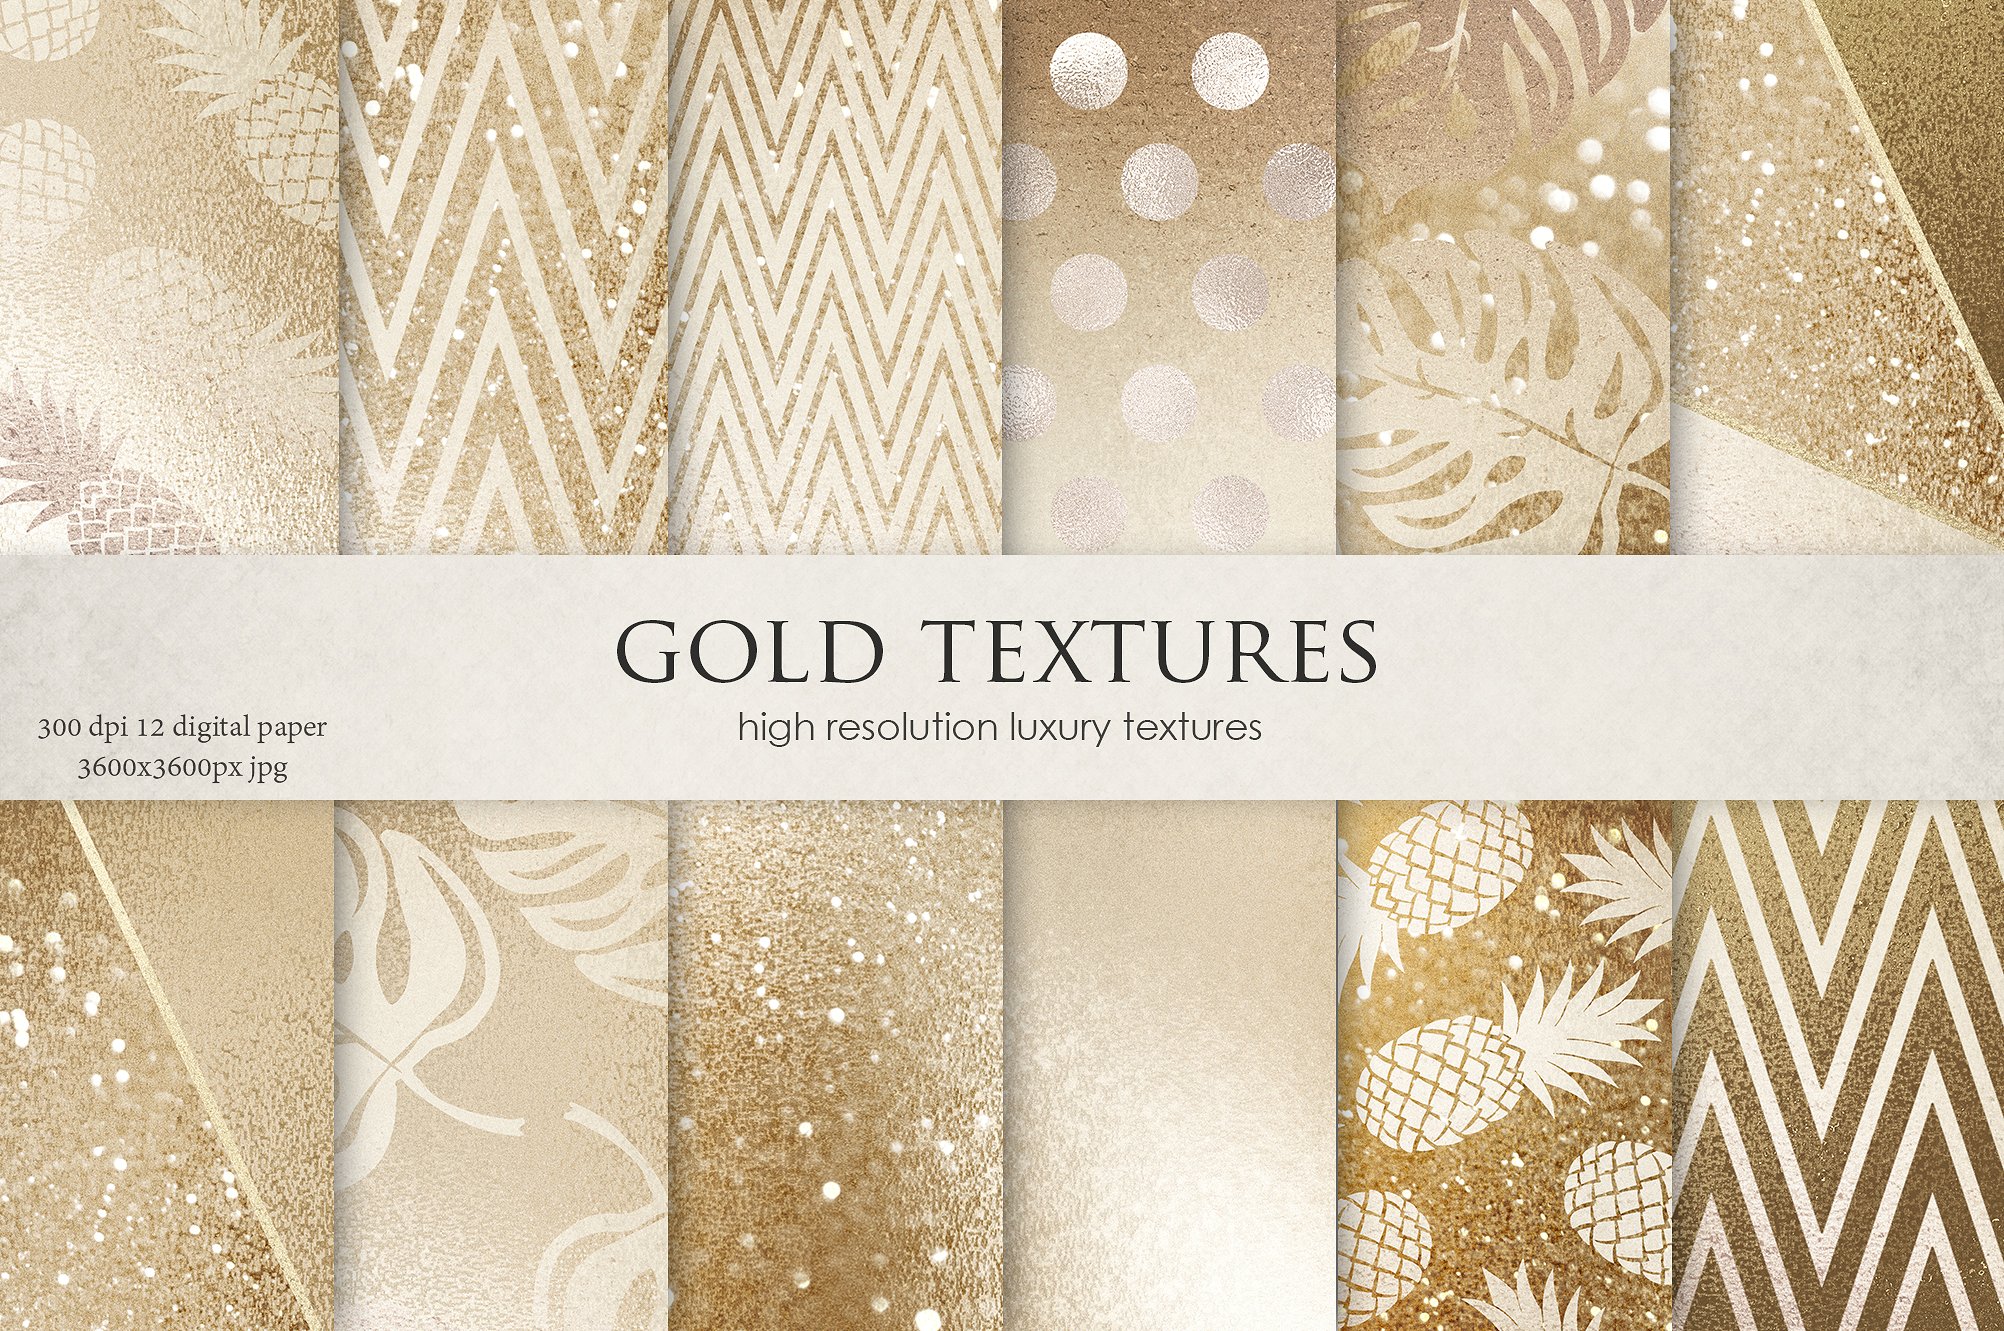 Luxury Gold and Glitter Textures